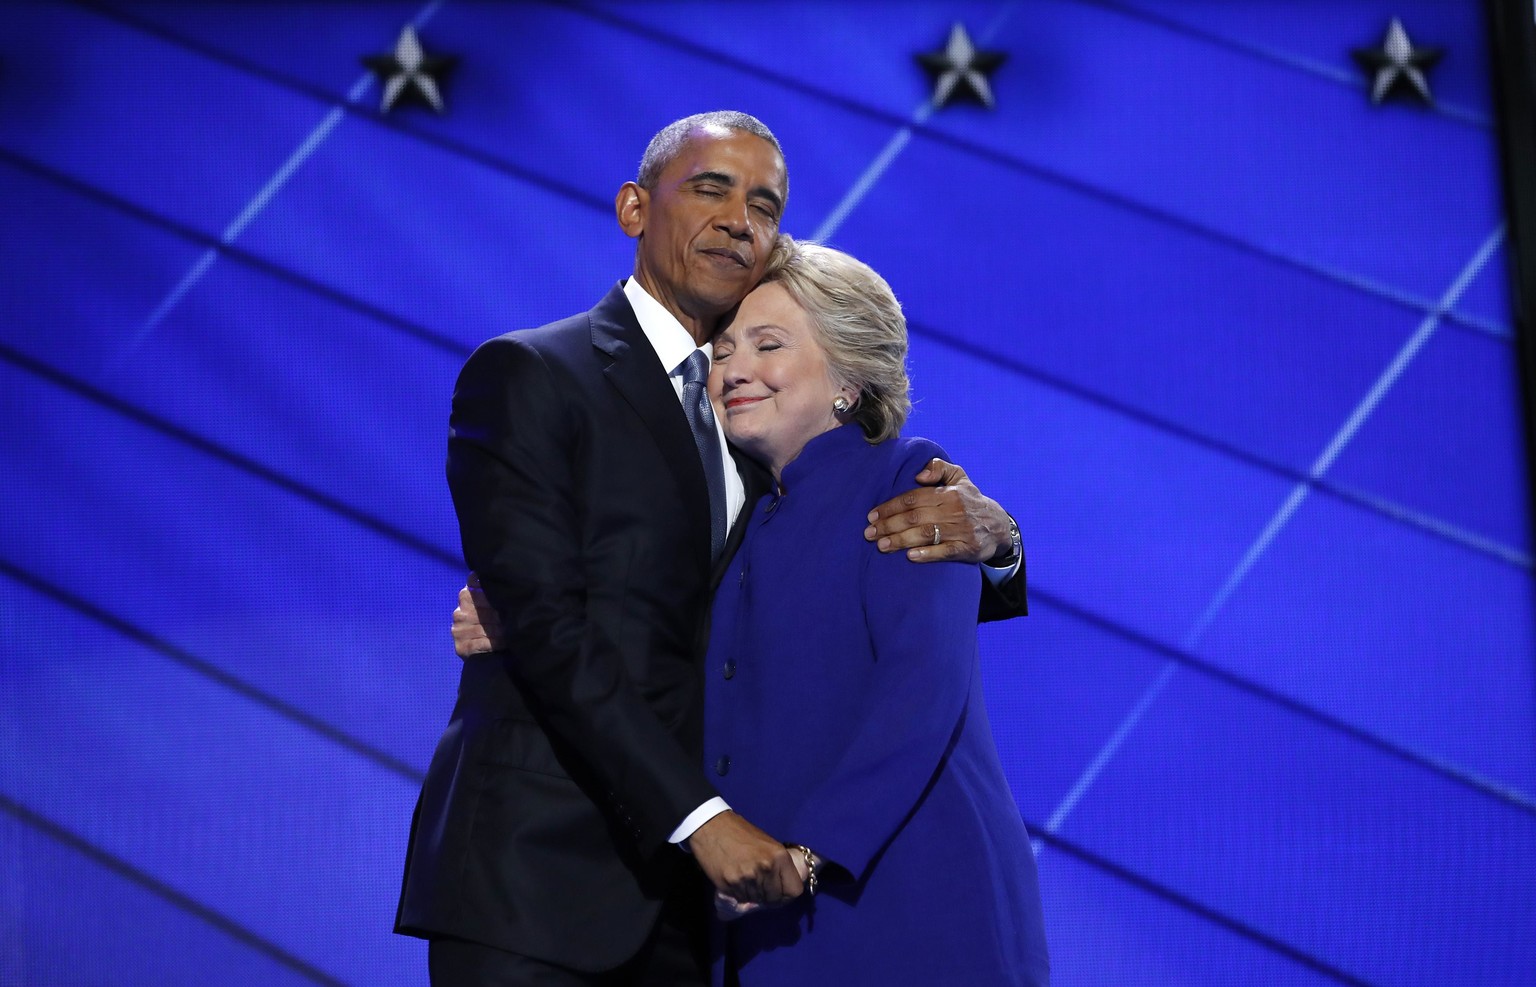 Democratic presidential nominee Hillary Clinton hugs U.S. President Barack Obama as she arrives onstage at the end of his speech on the third night of the 2016 Democratic National Convention in Philad ...